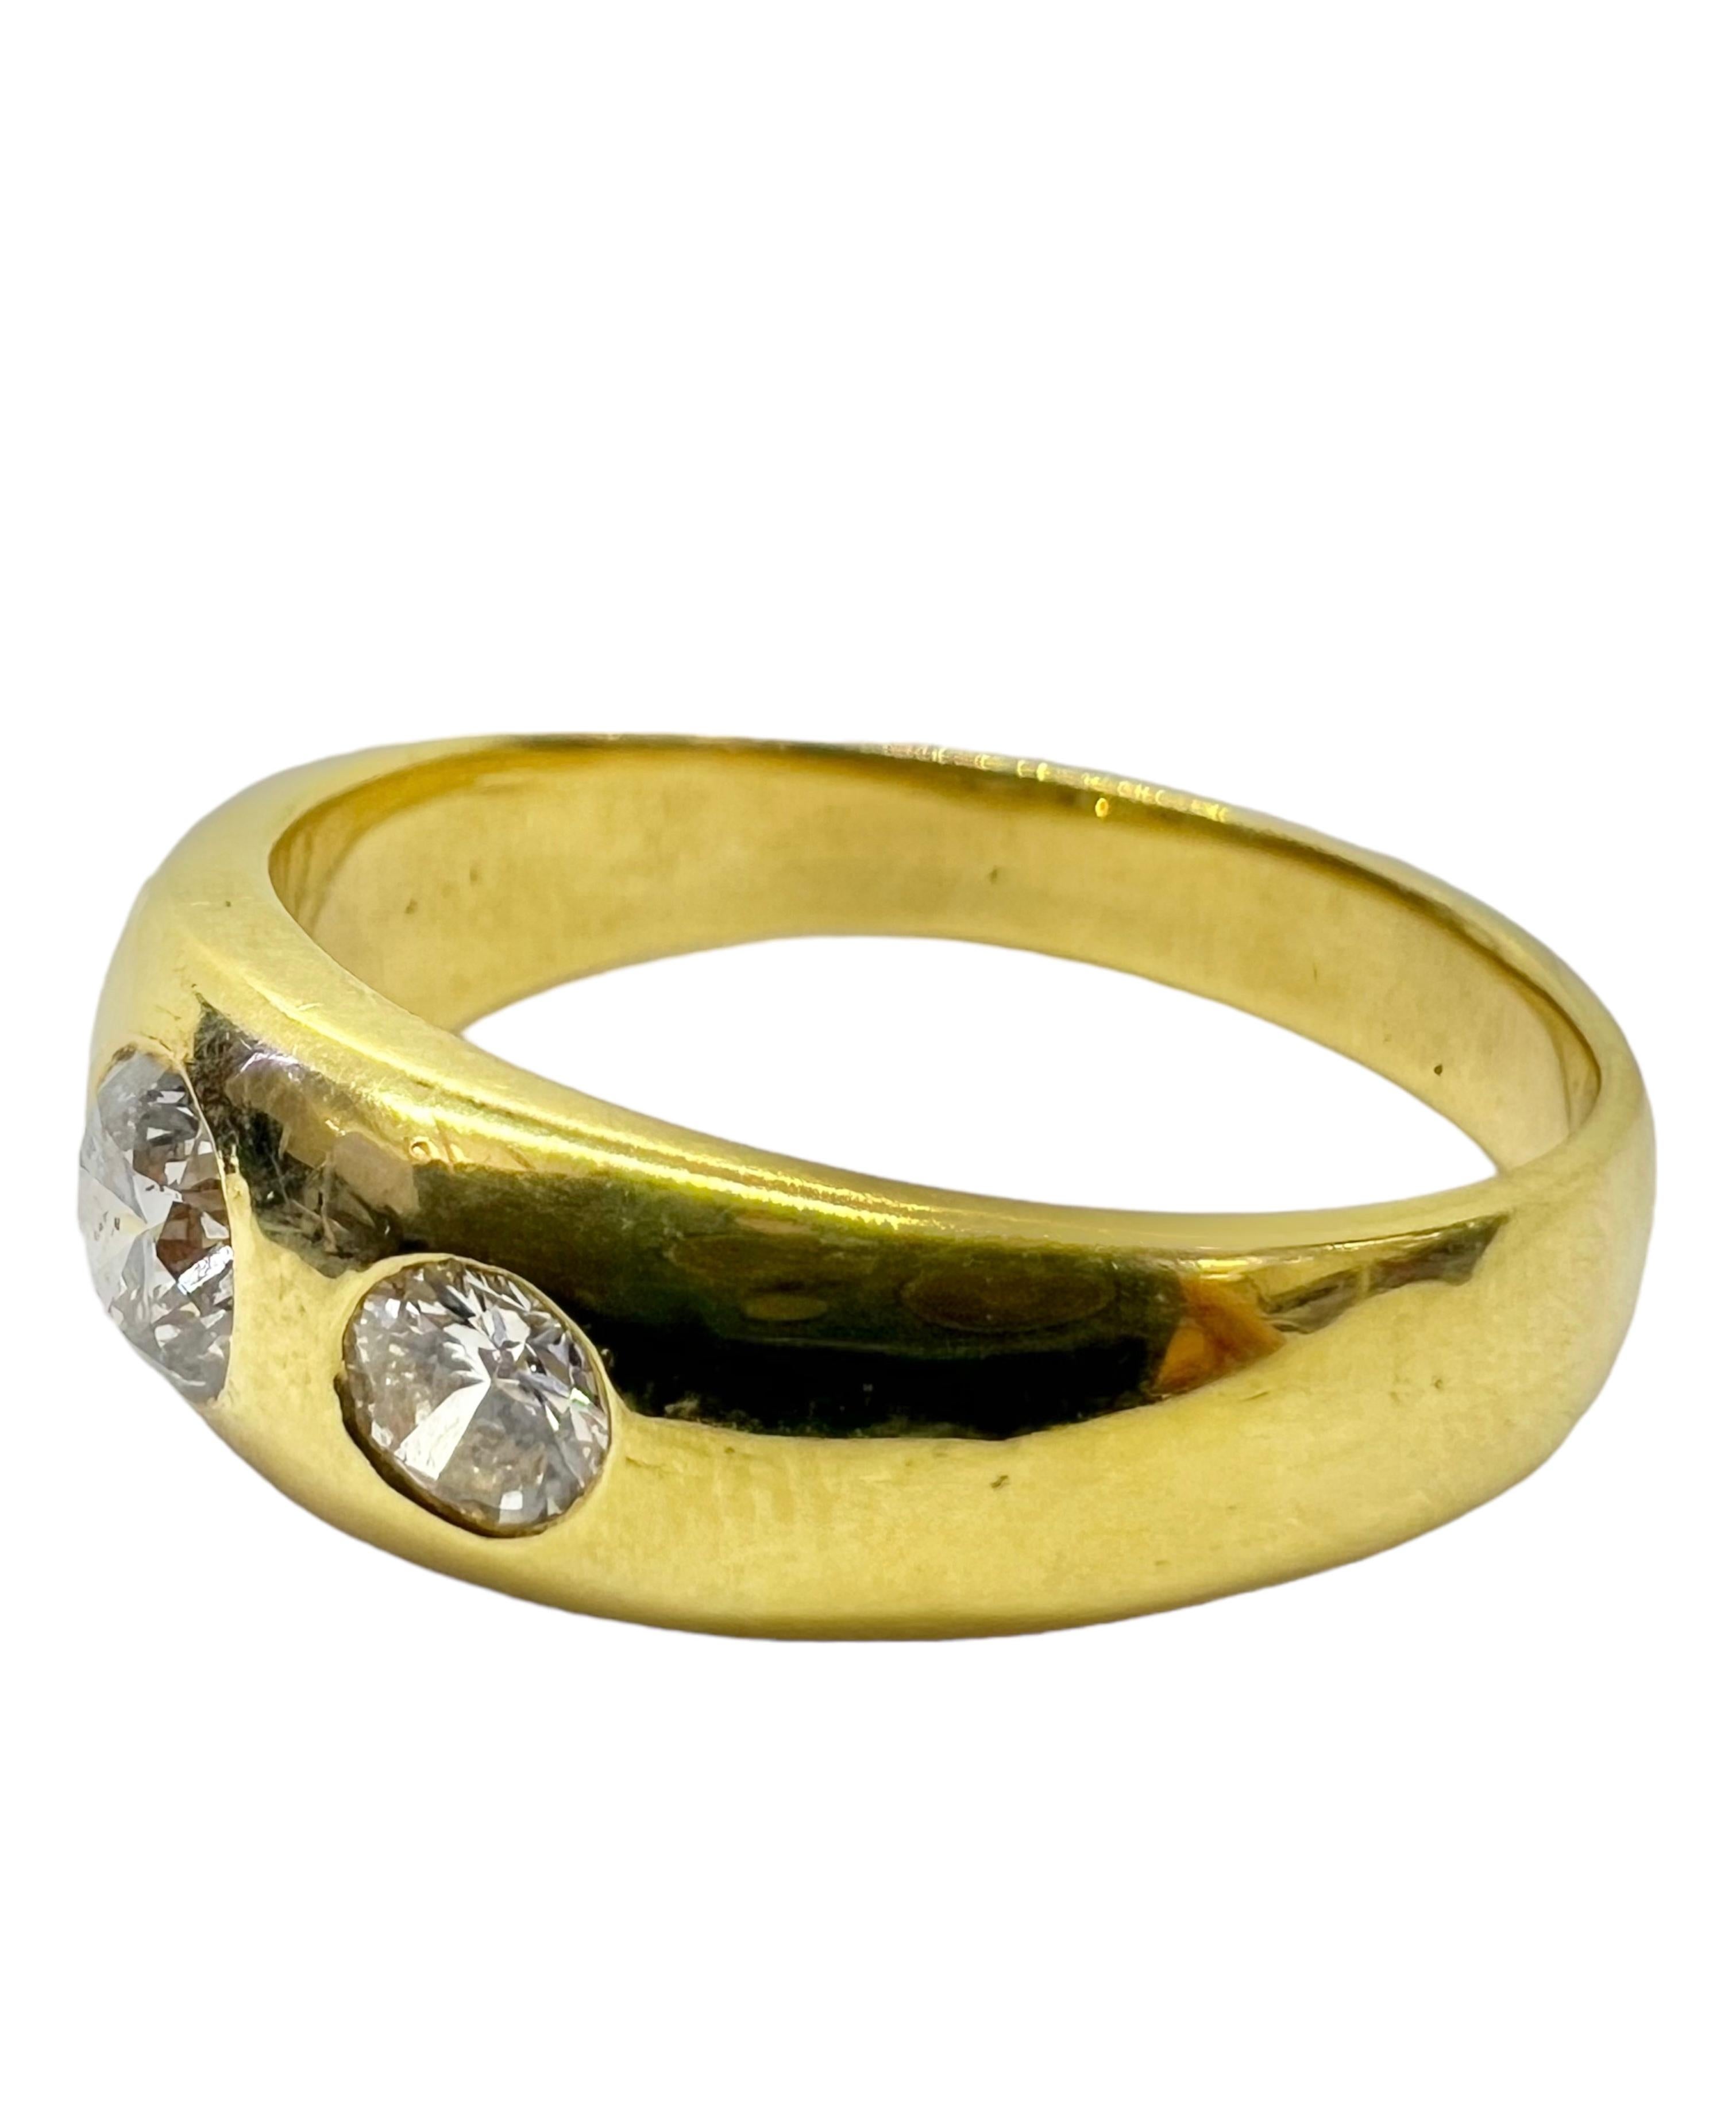 18K yellow gold ring with 3 round diamonds.

Sophia D by Joseph Dardashti LTD has been known worldwide for 35 years and are inspired by classic Art Deco design that merges with modern manufacturing techniques. 